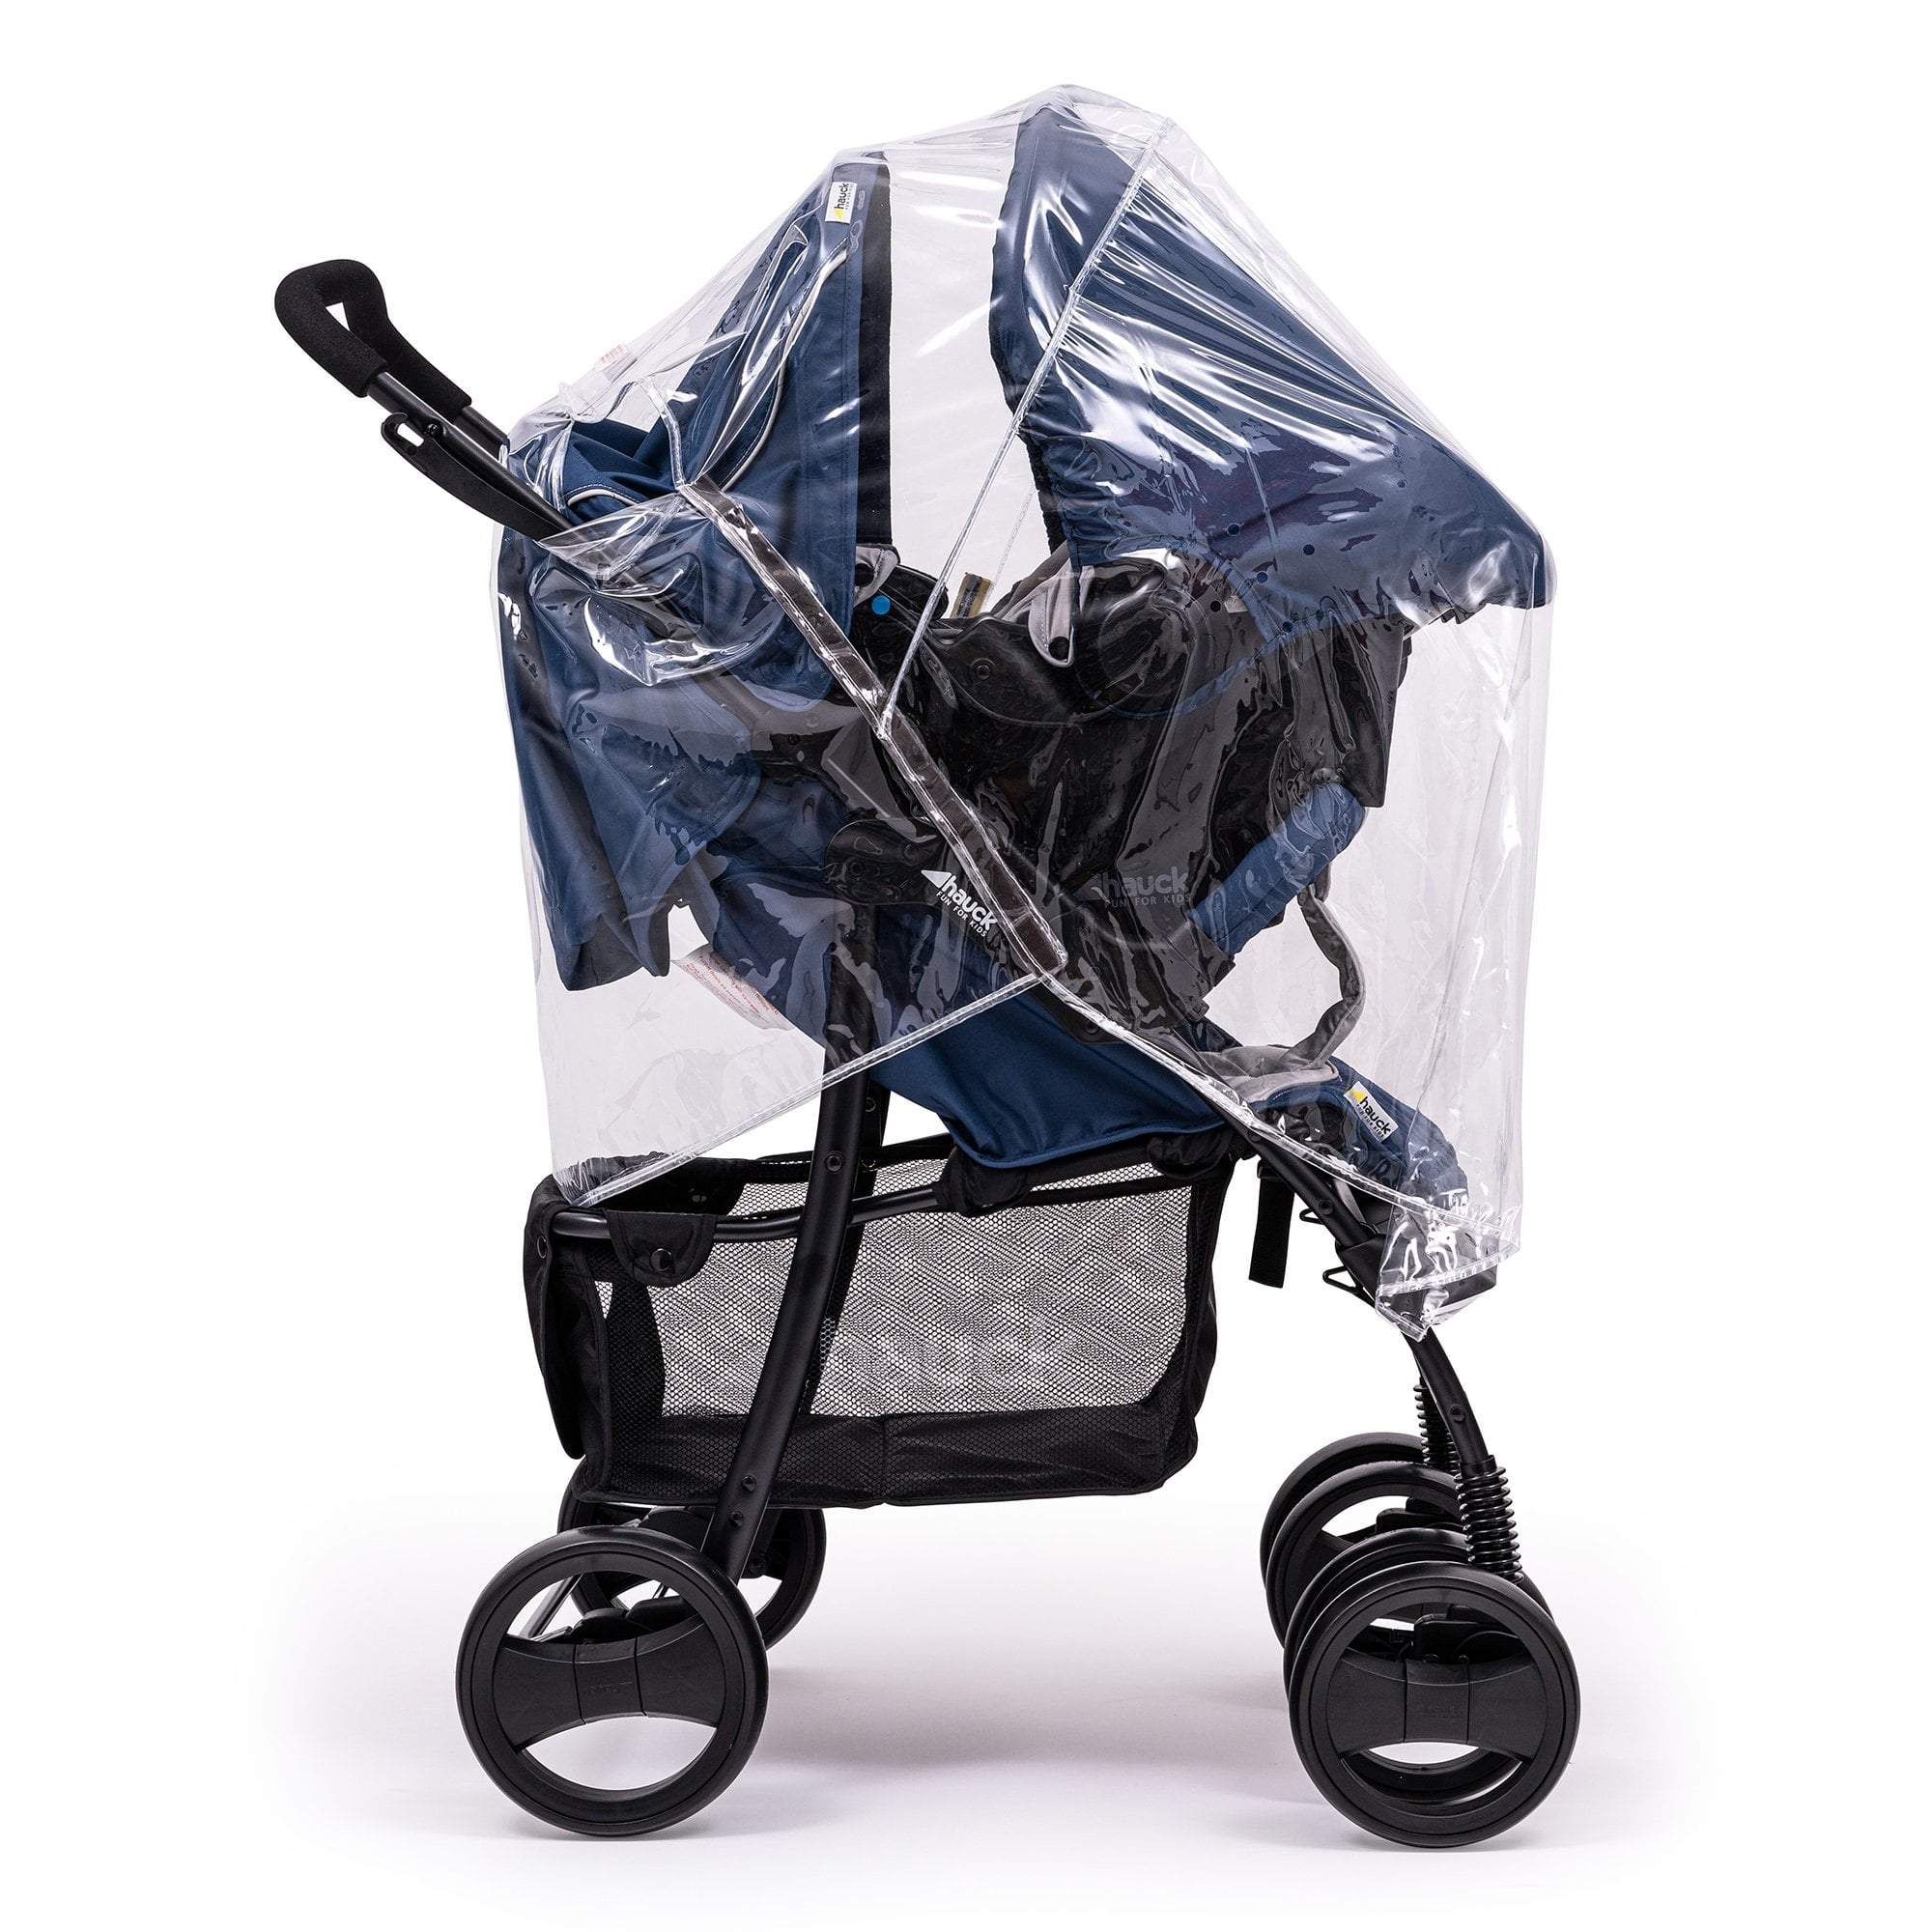 Travel System Raincover Compatible with Quinny - Fits All Models - For Your Little One